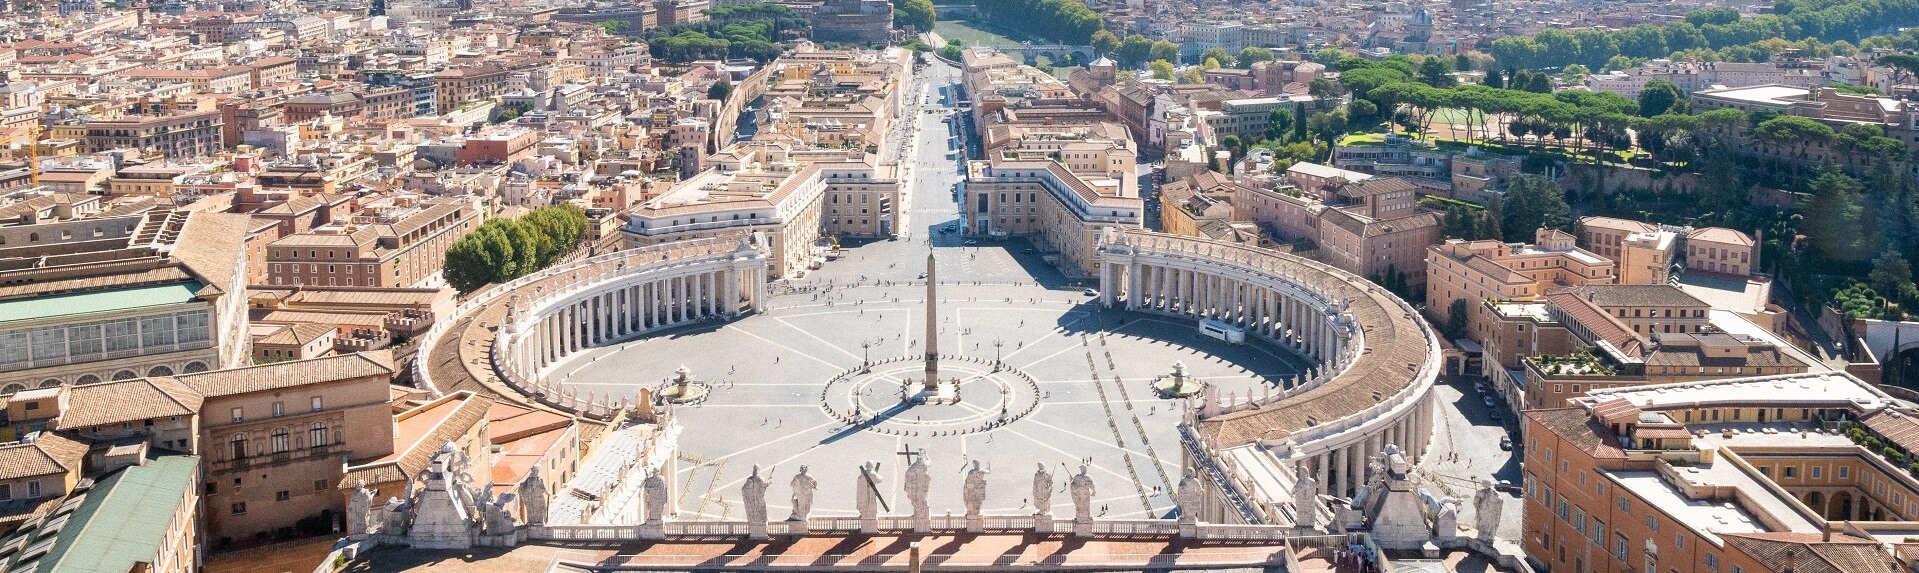 The dos & don’ts in Rome